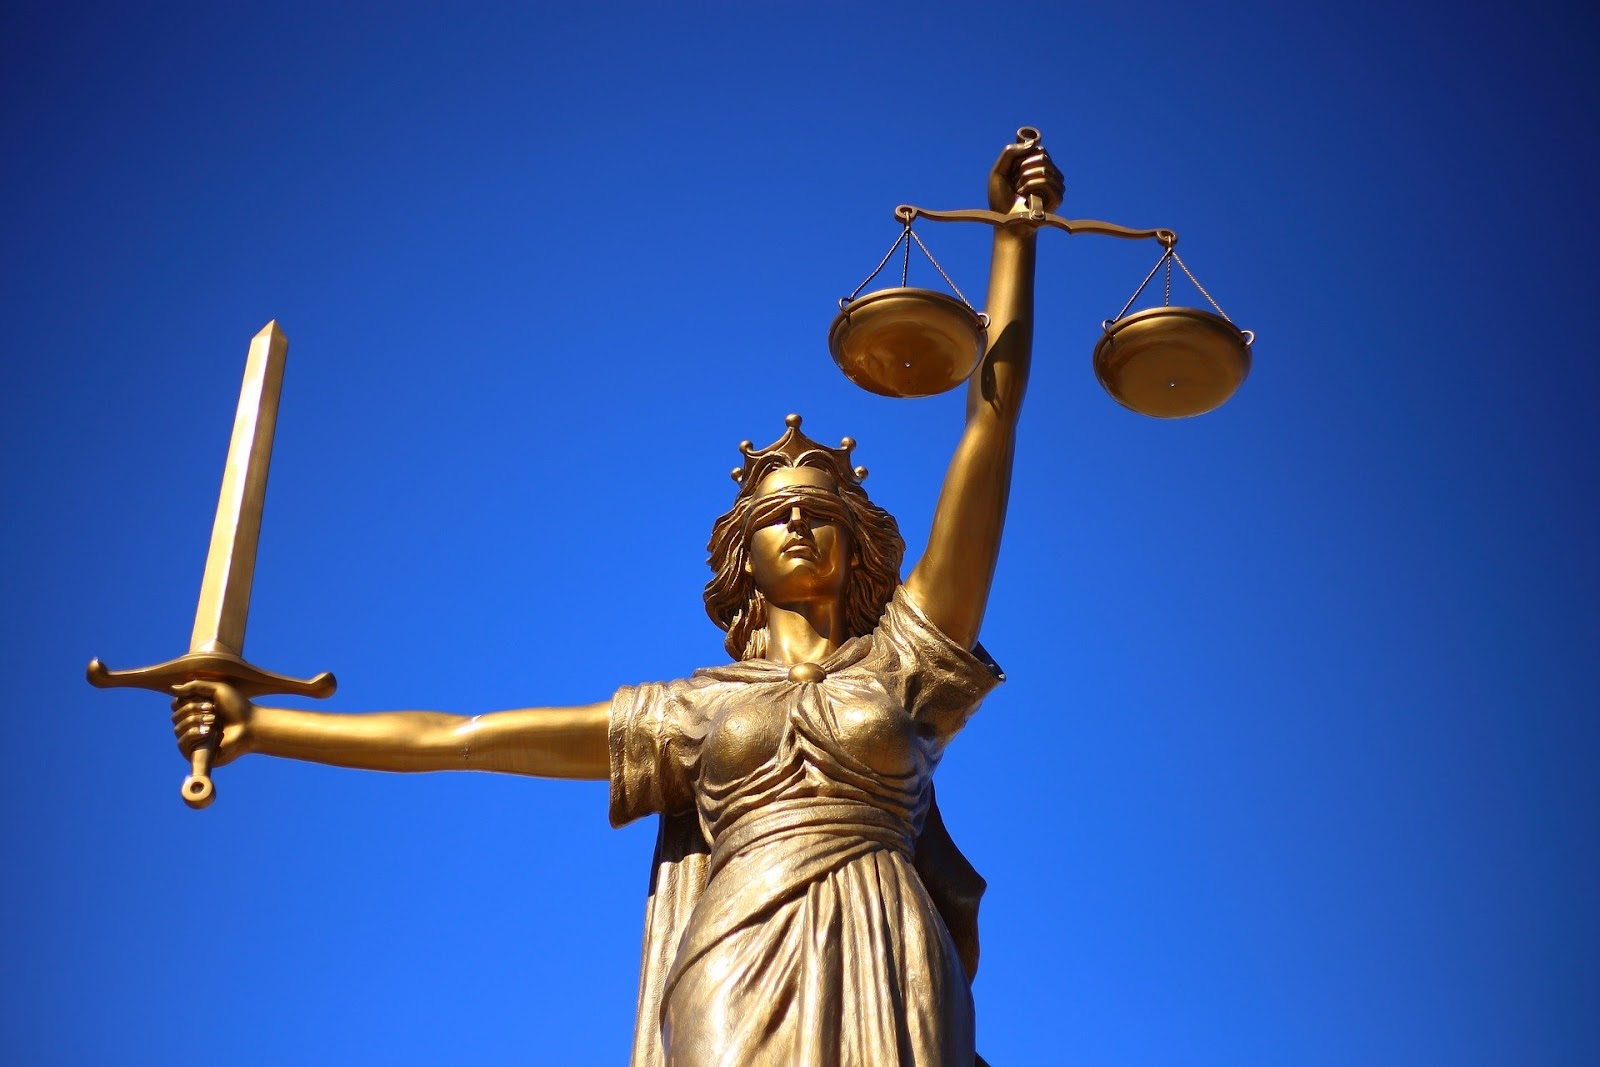 A picture of a gold statue lady justice, blindfolded, holding the scales of justice in one hand and a sword in the other